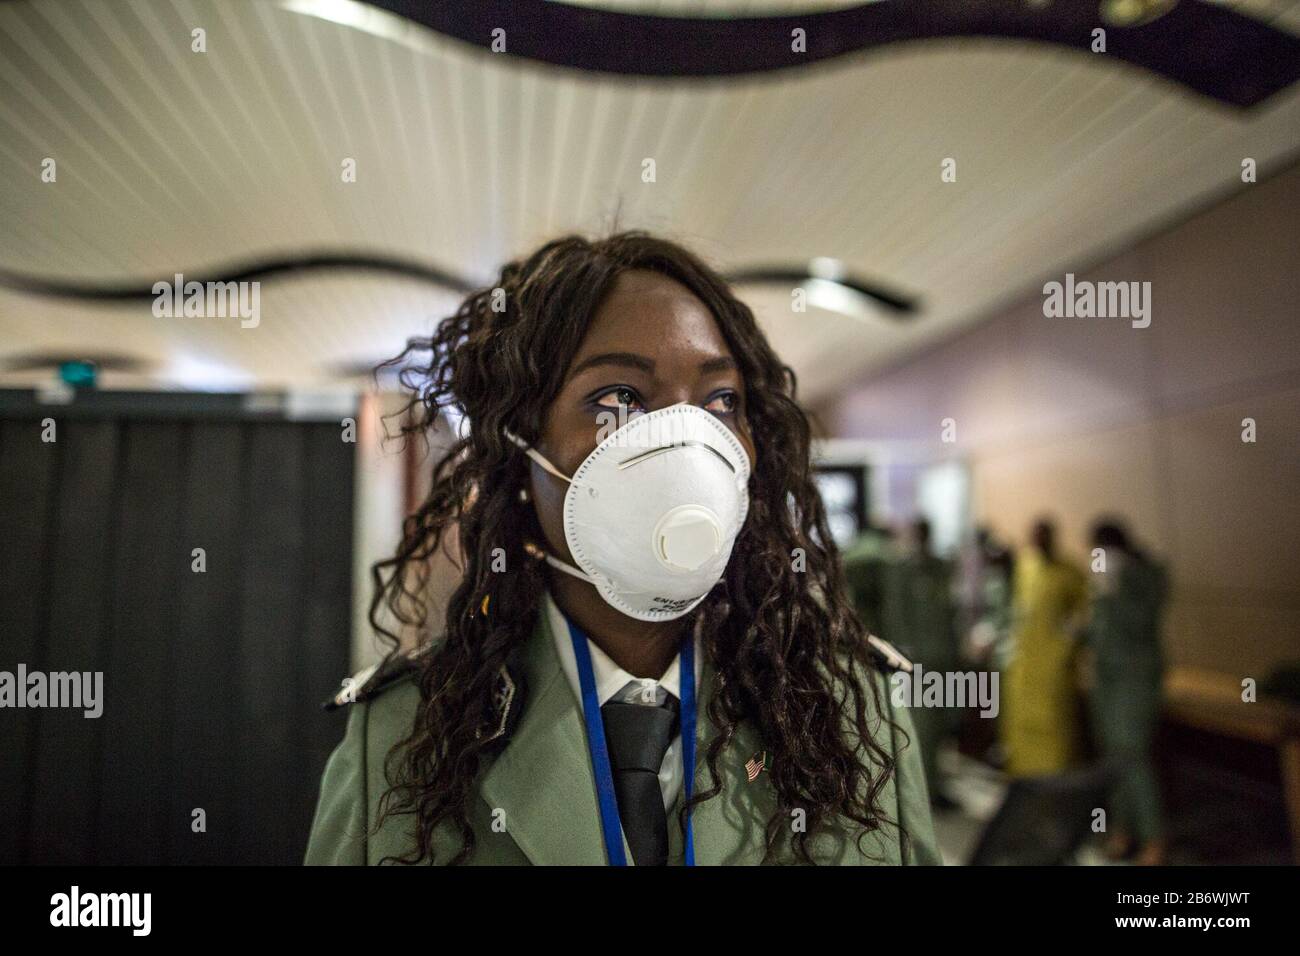 Dakar. 10th Mar, 2020. Photo taken on March 10, 2020 shows a Senegalese customs officer wearing face mask while working in Dakar, Senegal. Senegalese Ministry of Health and Social Action confirmed the country's fifth case of the COVID-19 on Wednesday. In order to prevent more cases from entering Senegal, the authorities of Blaise Diagne International Airport, under the guideline of Senegalese Ministry of Health and Social Action, have intensified all the necessary measures to detect cases of the novel coronavirus. Credit: Eddy Peters/Xinhua/Alamy Live News Stock Photo